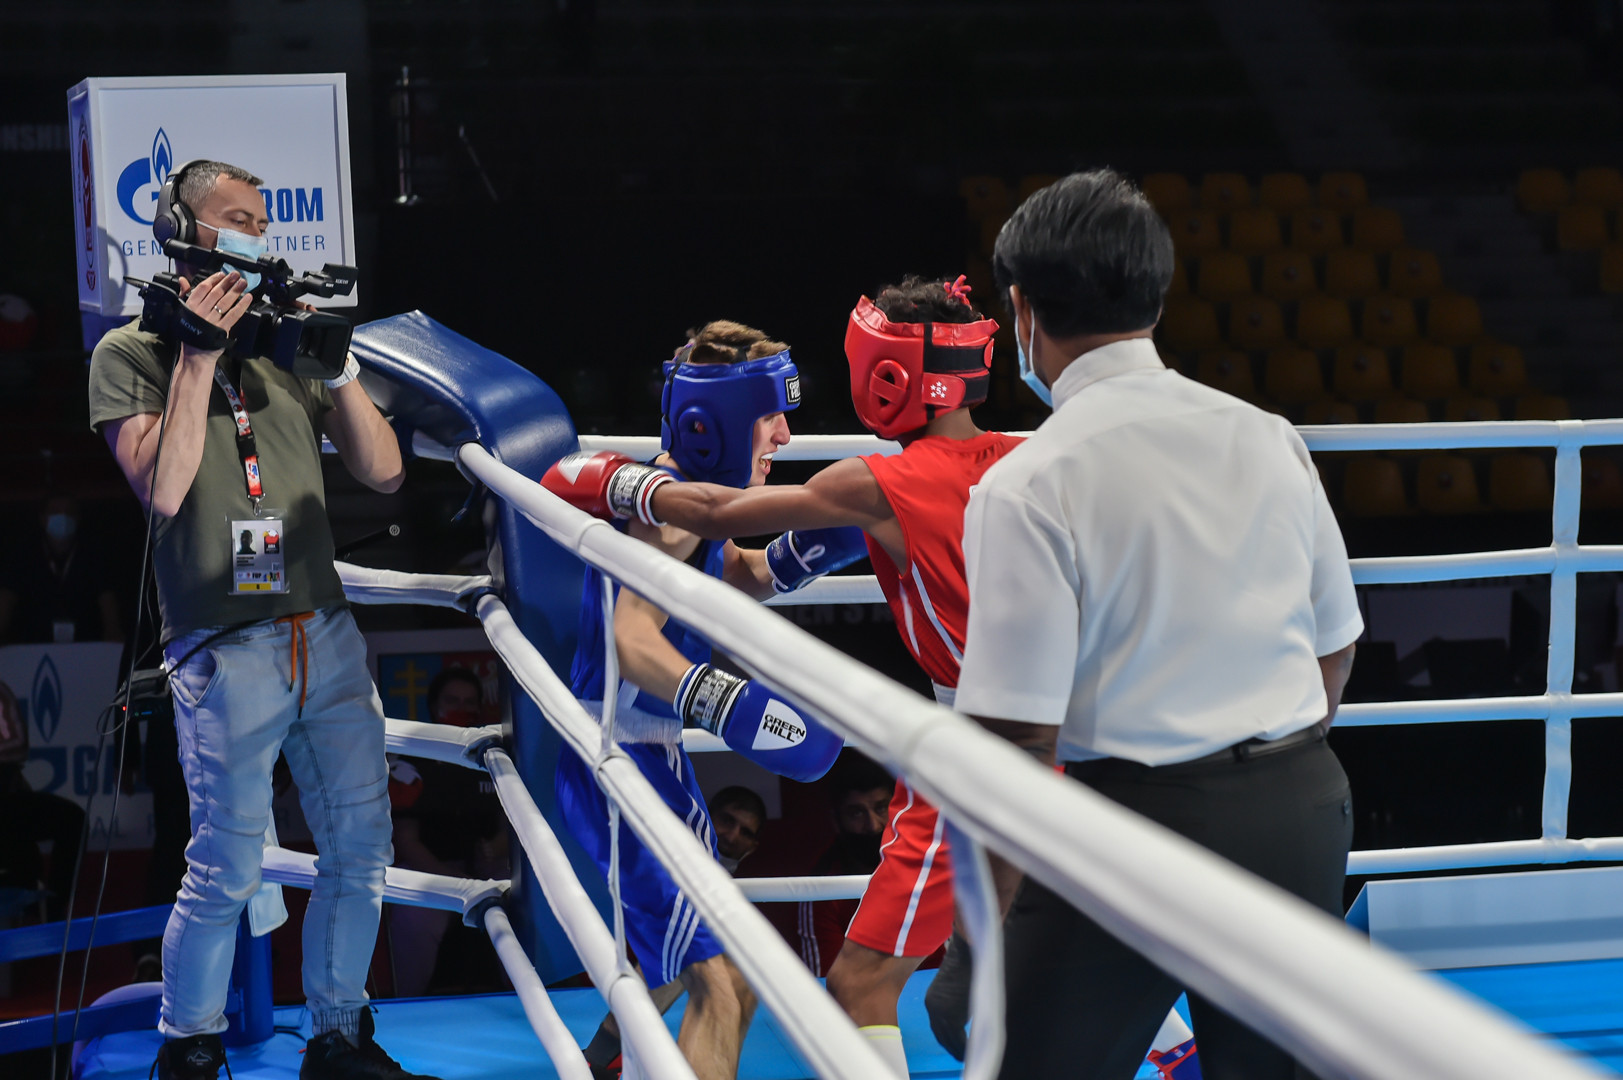 The Championships are being televised around the world ©AIBA